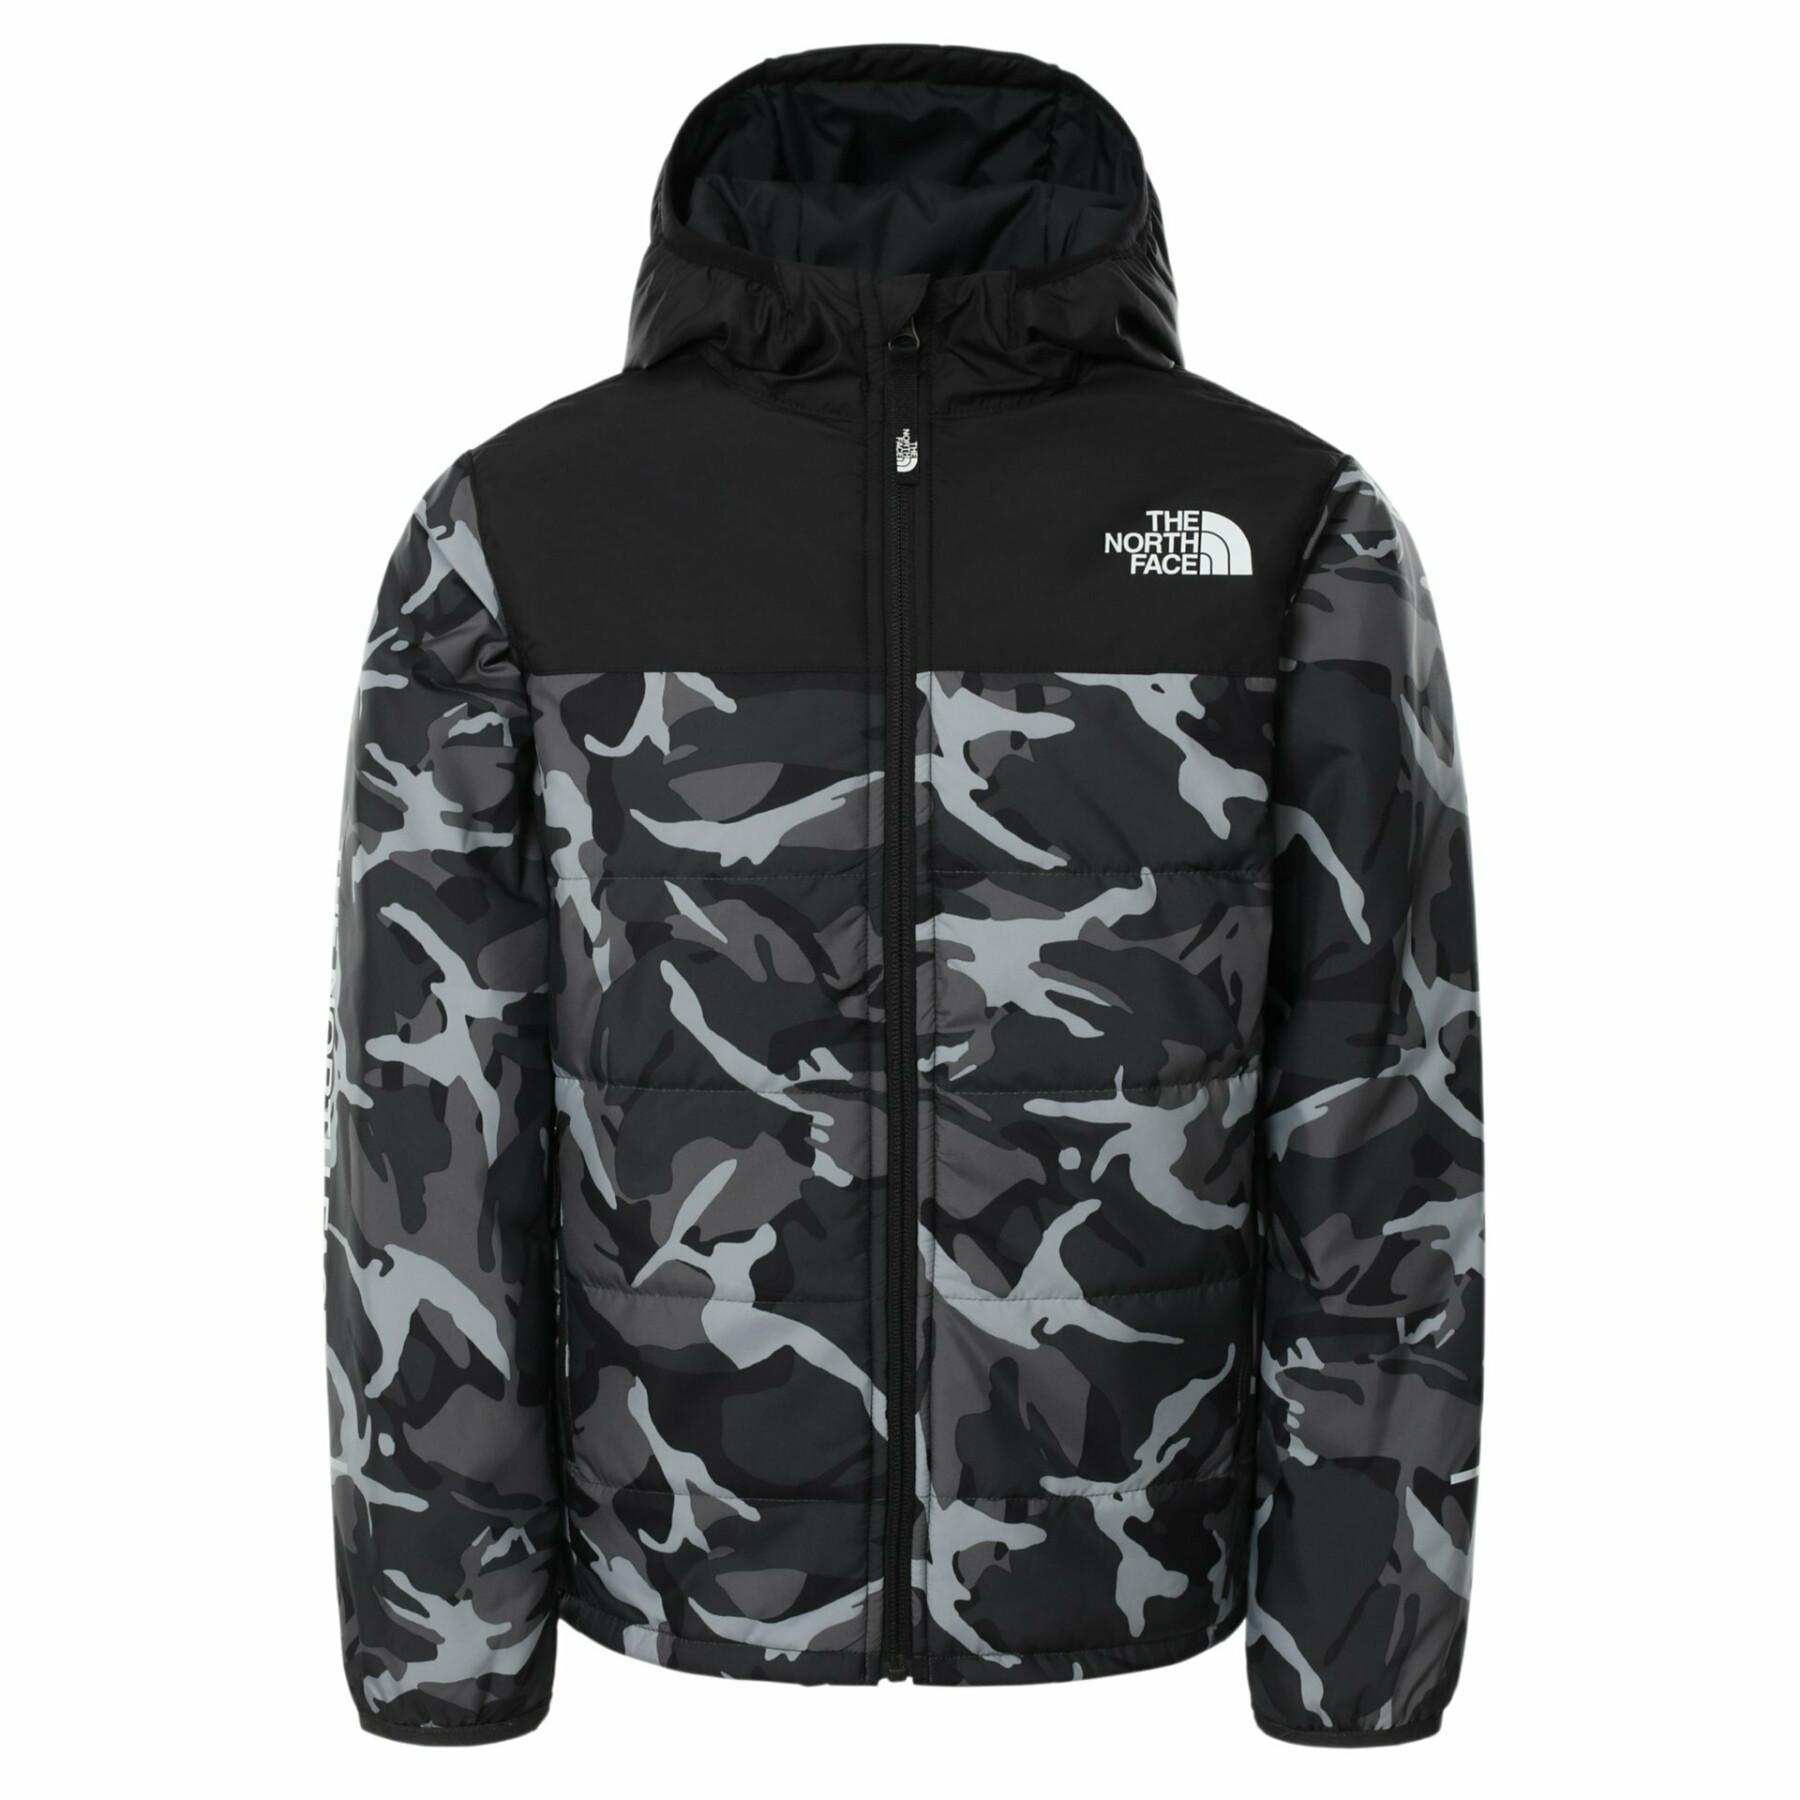 Boy's jacket The North Face Printed Reactor Insulated